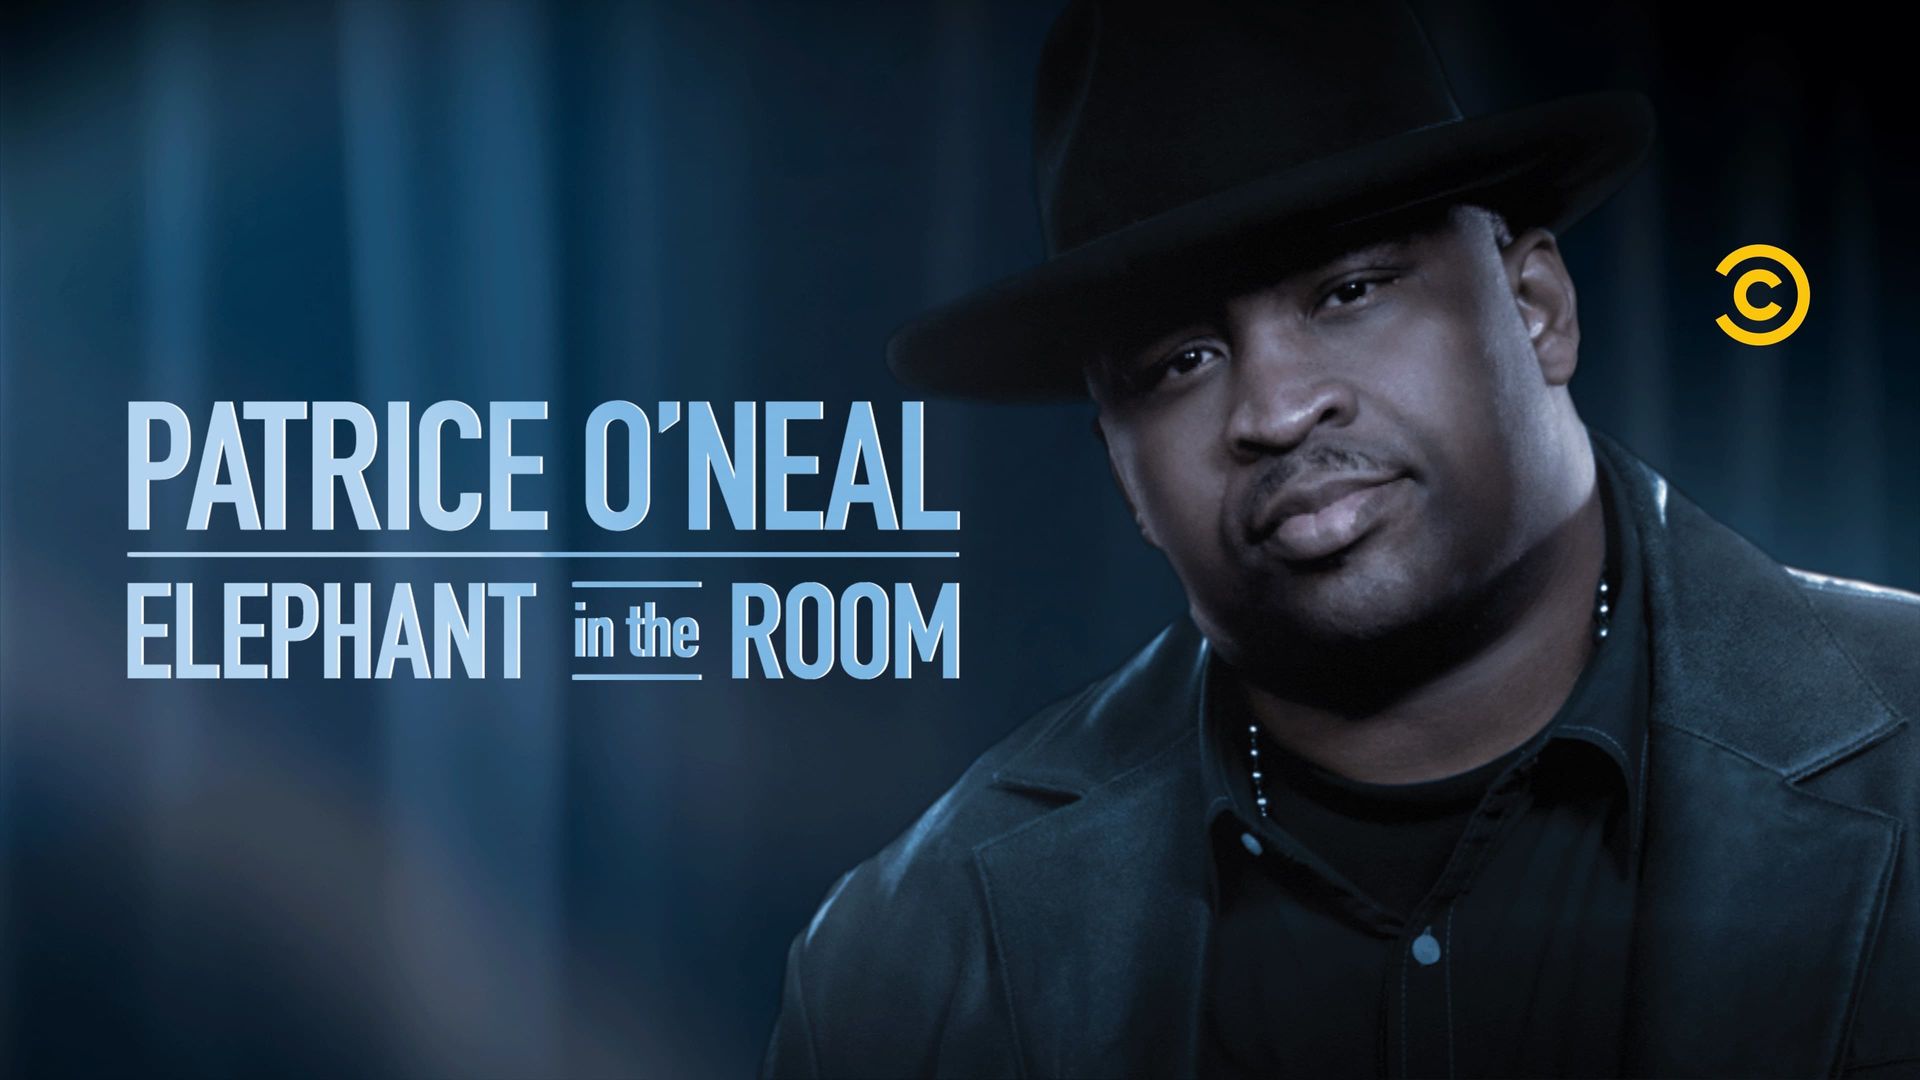 Patrice O'Neal: Elephant in the Room background